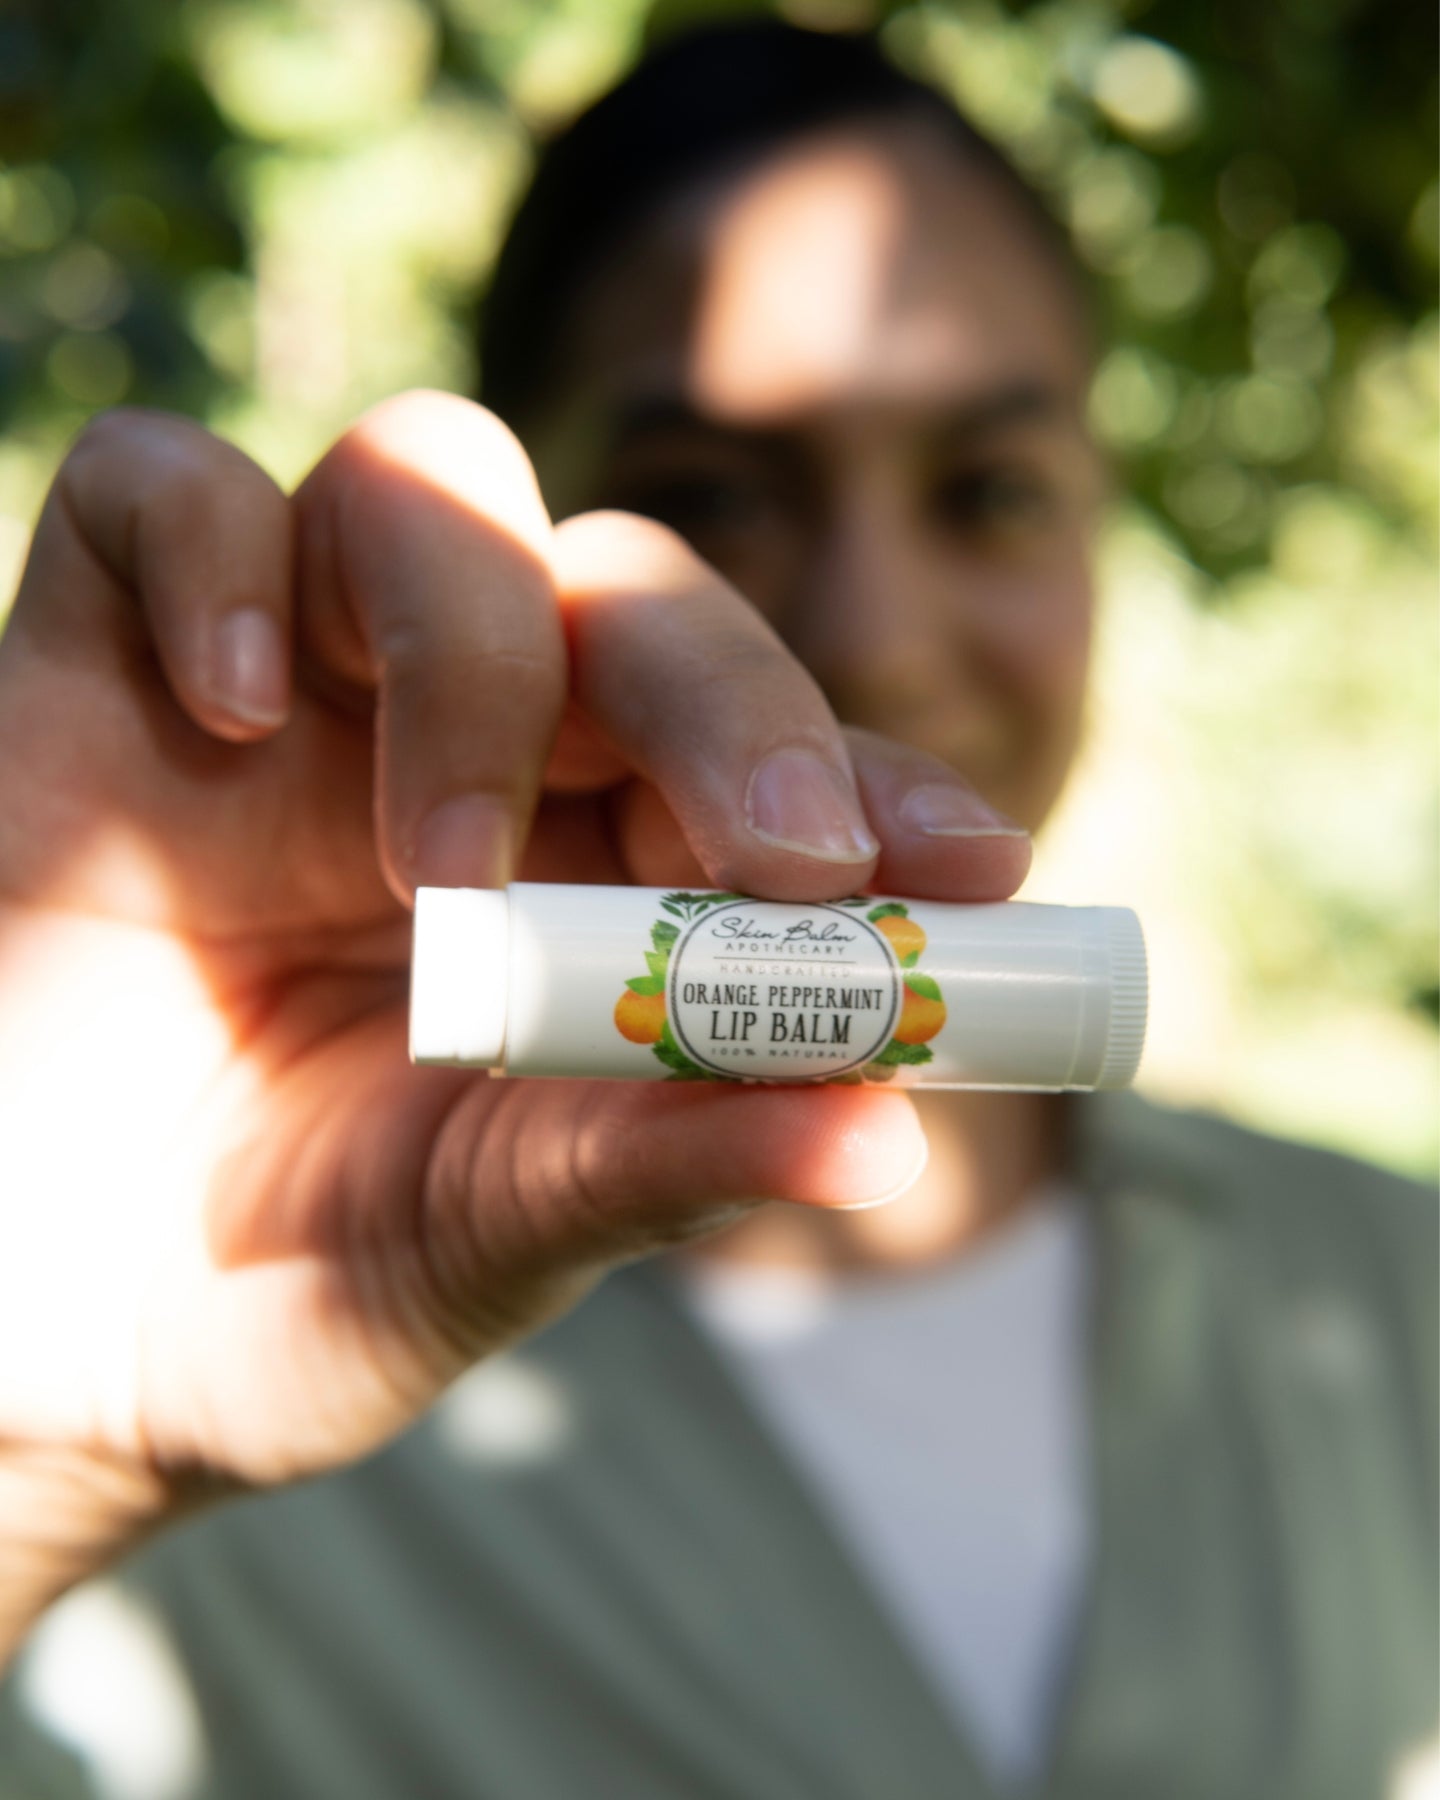 Orange Peppermint Lip Balm focused in the foreground with a woman blurred in the background.